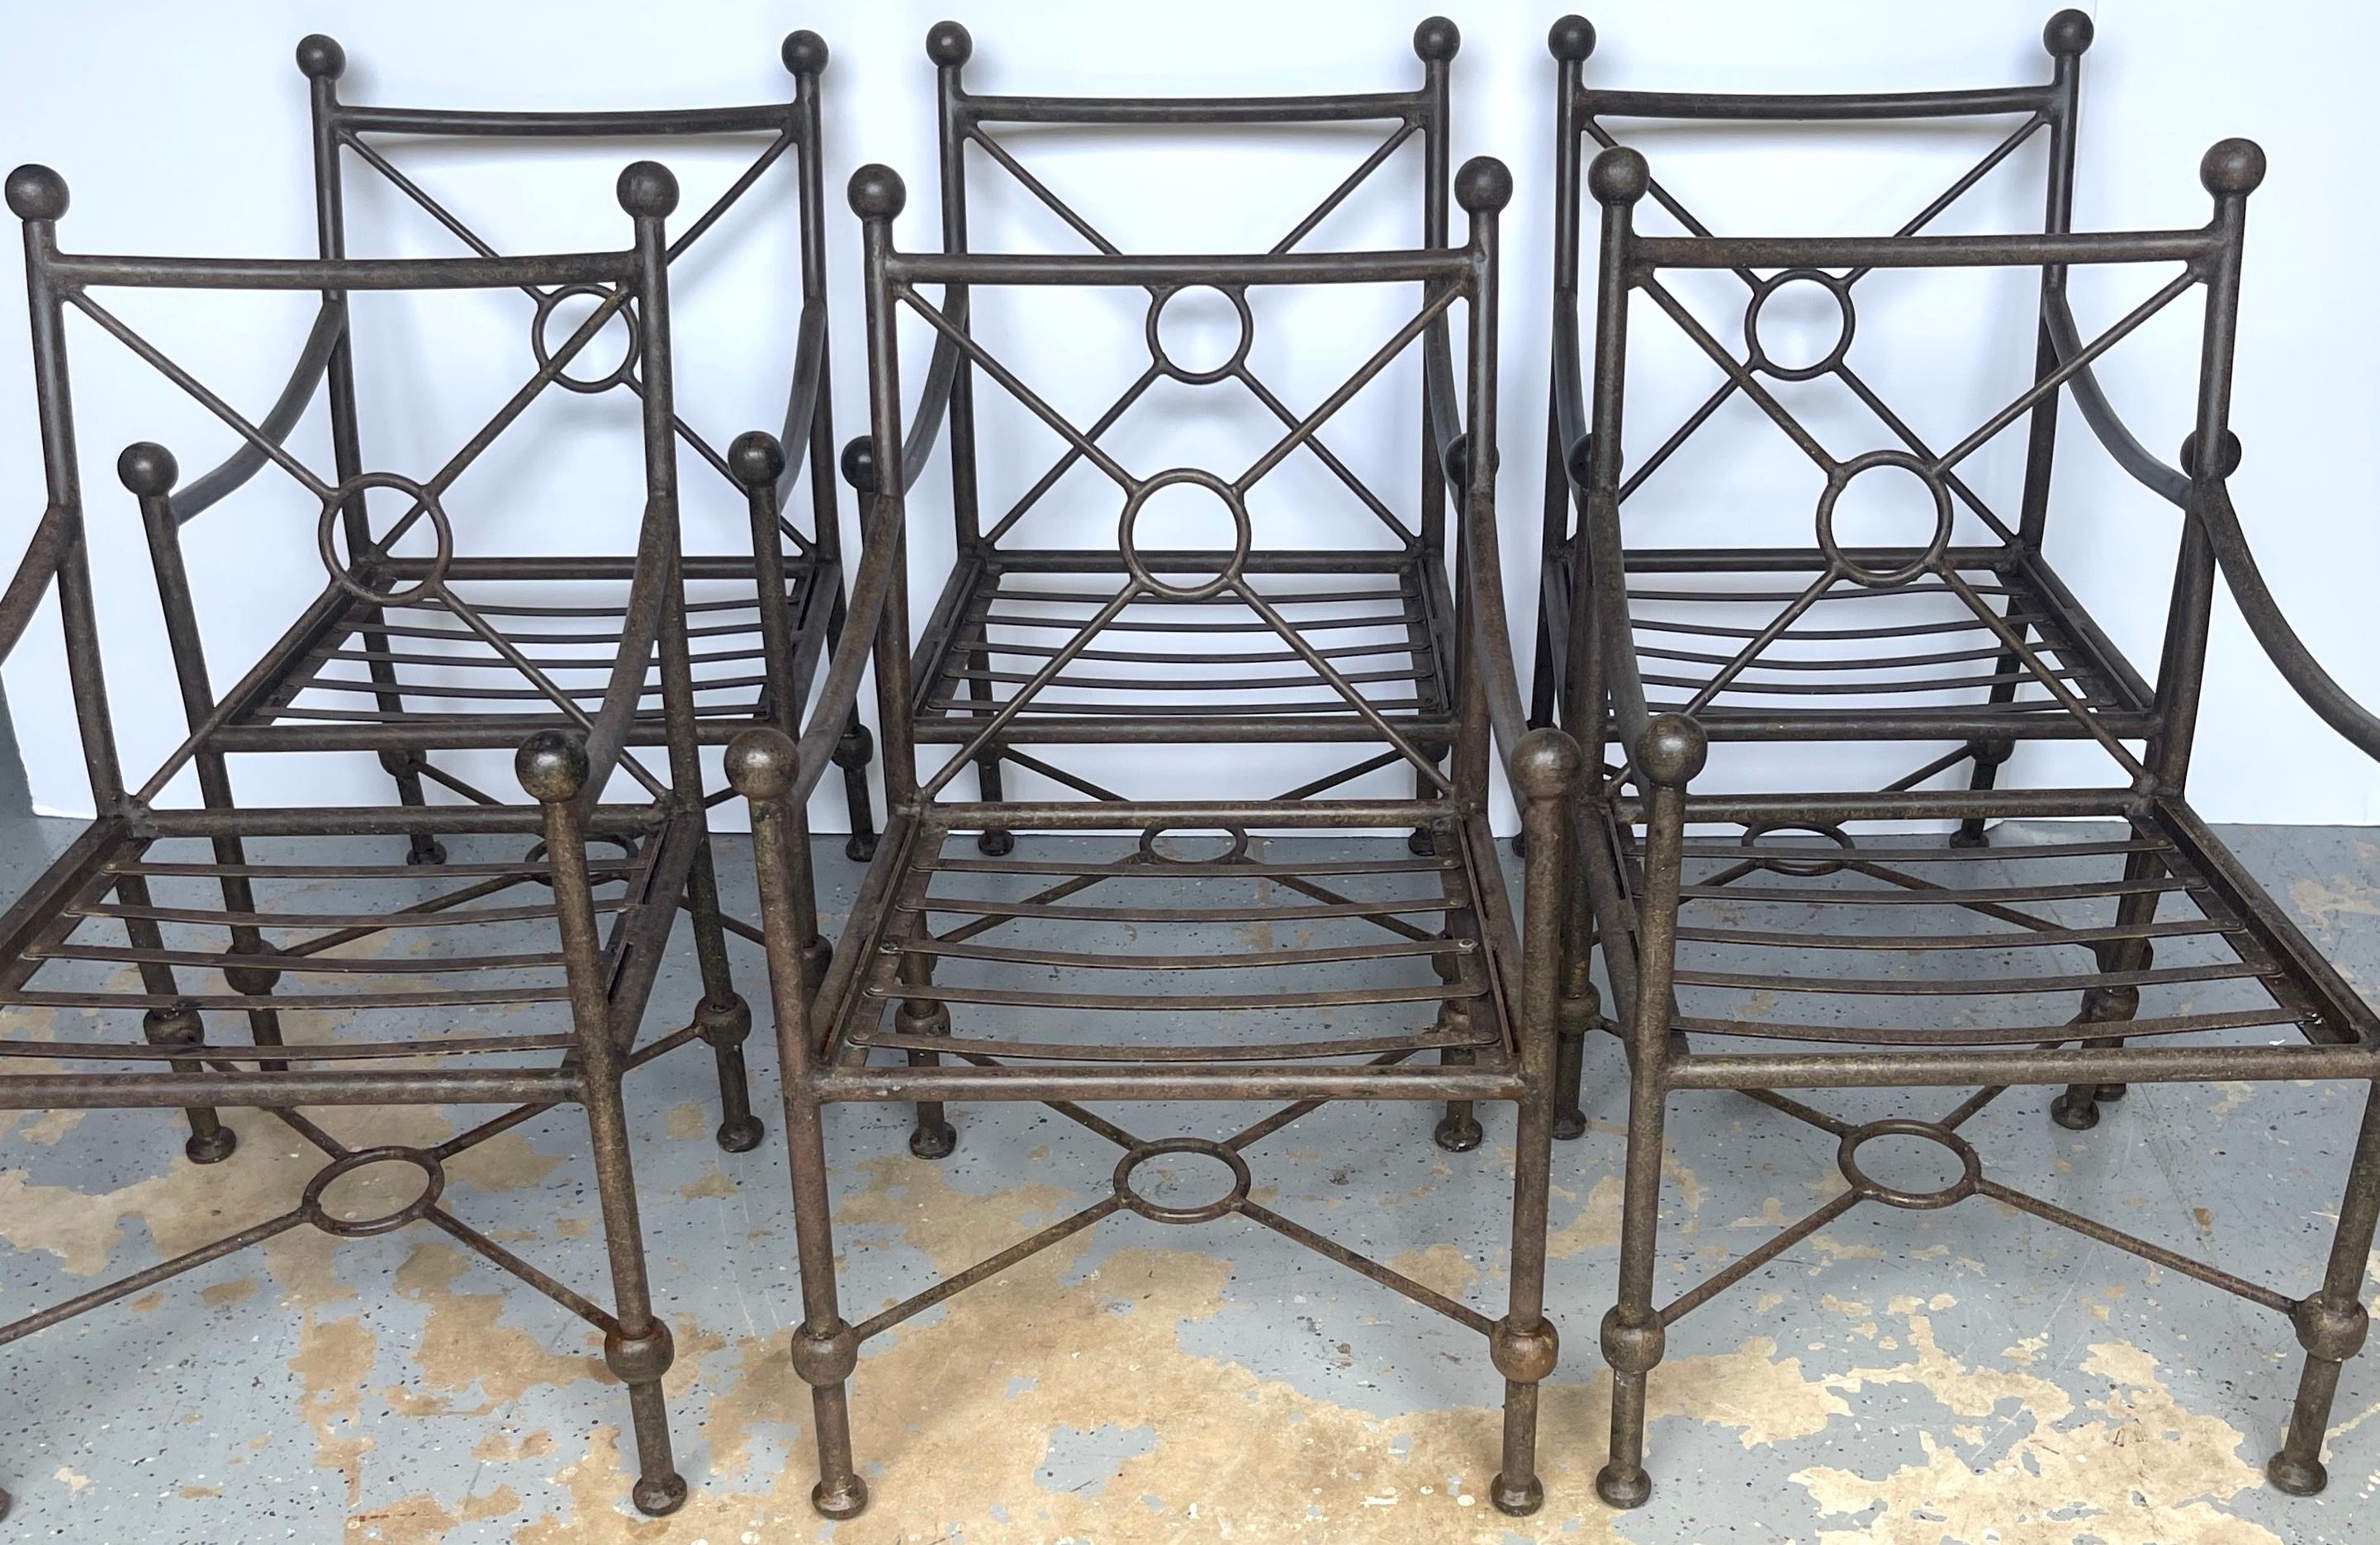 Six Neoclassical Style Aluminum Garden Arm Chairs by Brown Jordan 
Circa 1990s

Add a touch of timeless elegance to your garden with this set of six Neoclassical style aluminum arm chairs by renowned brand Brown Jordan. Dating back to the 1990s,